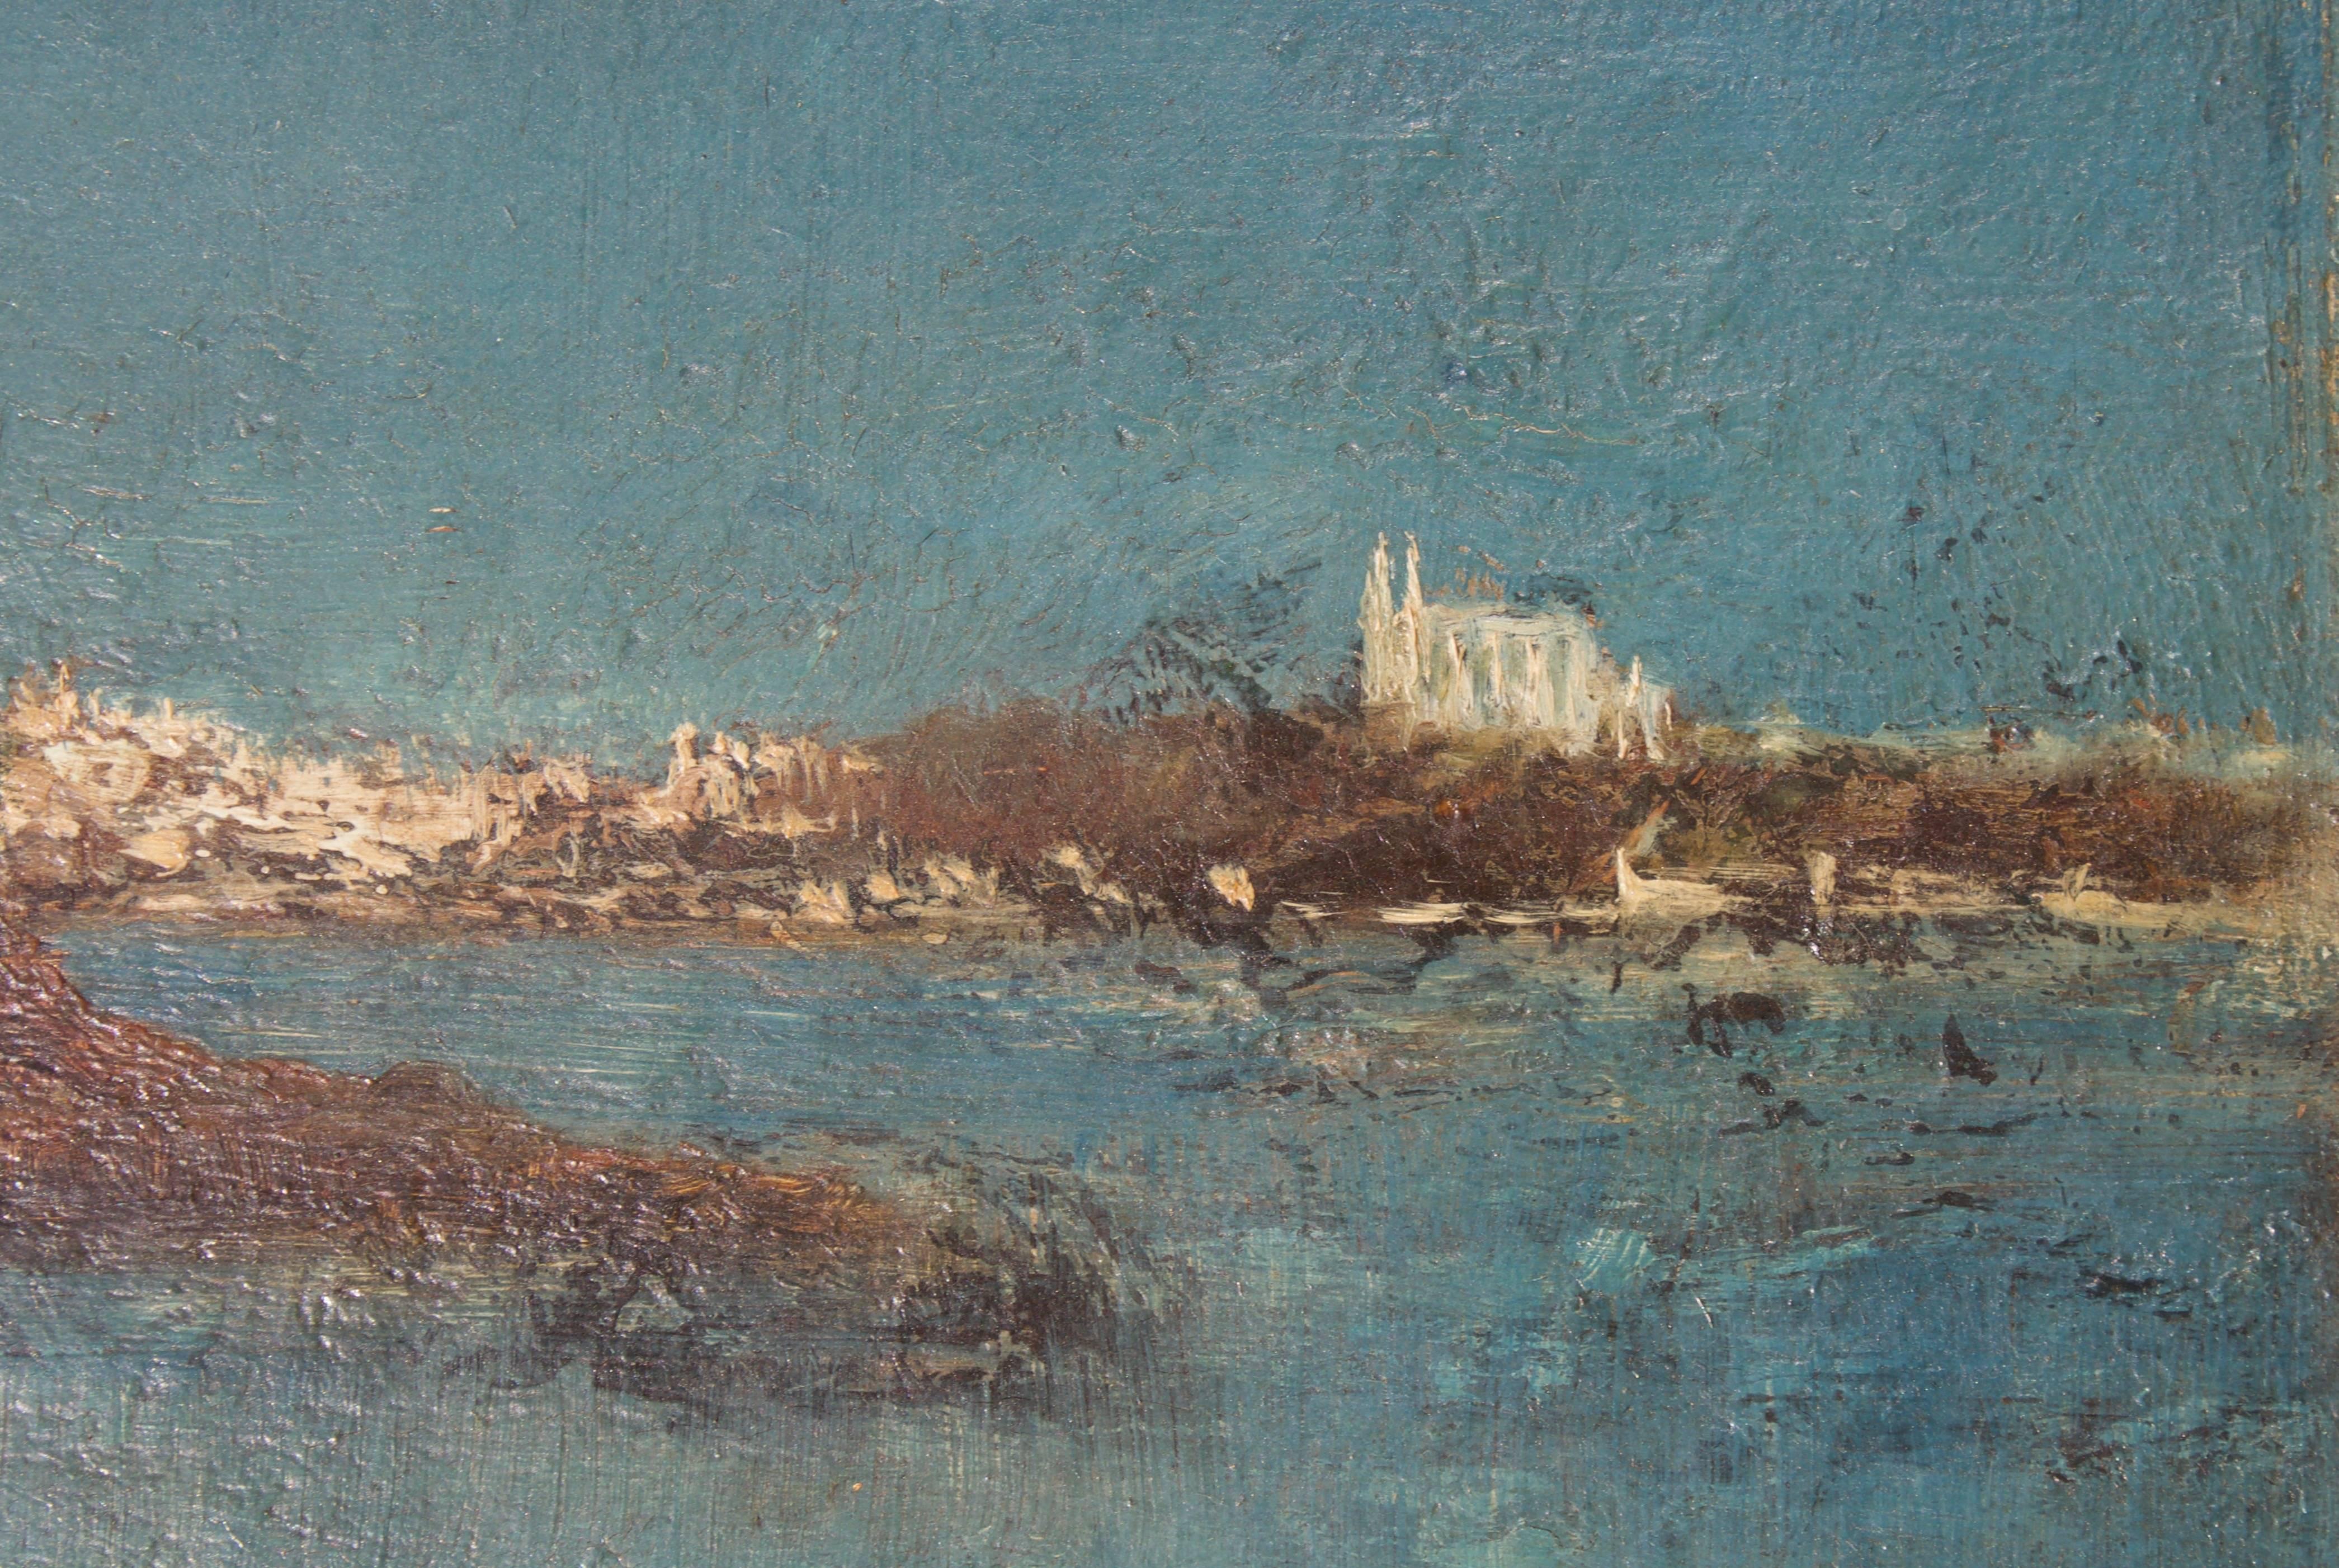 Mallorca with Catedral Santa Maria de Palma - Gray Landscape Painting by Unknown